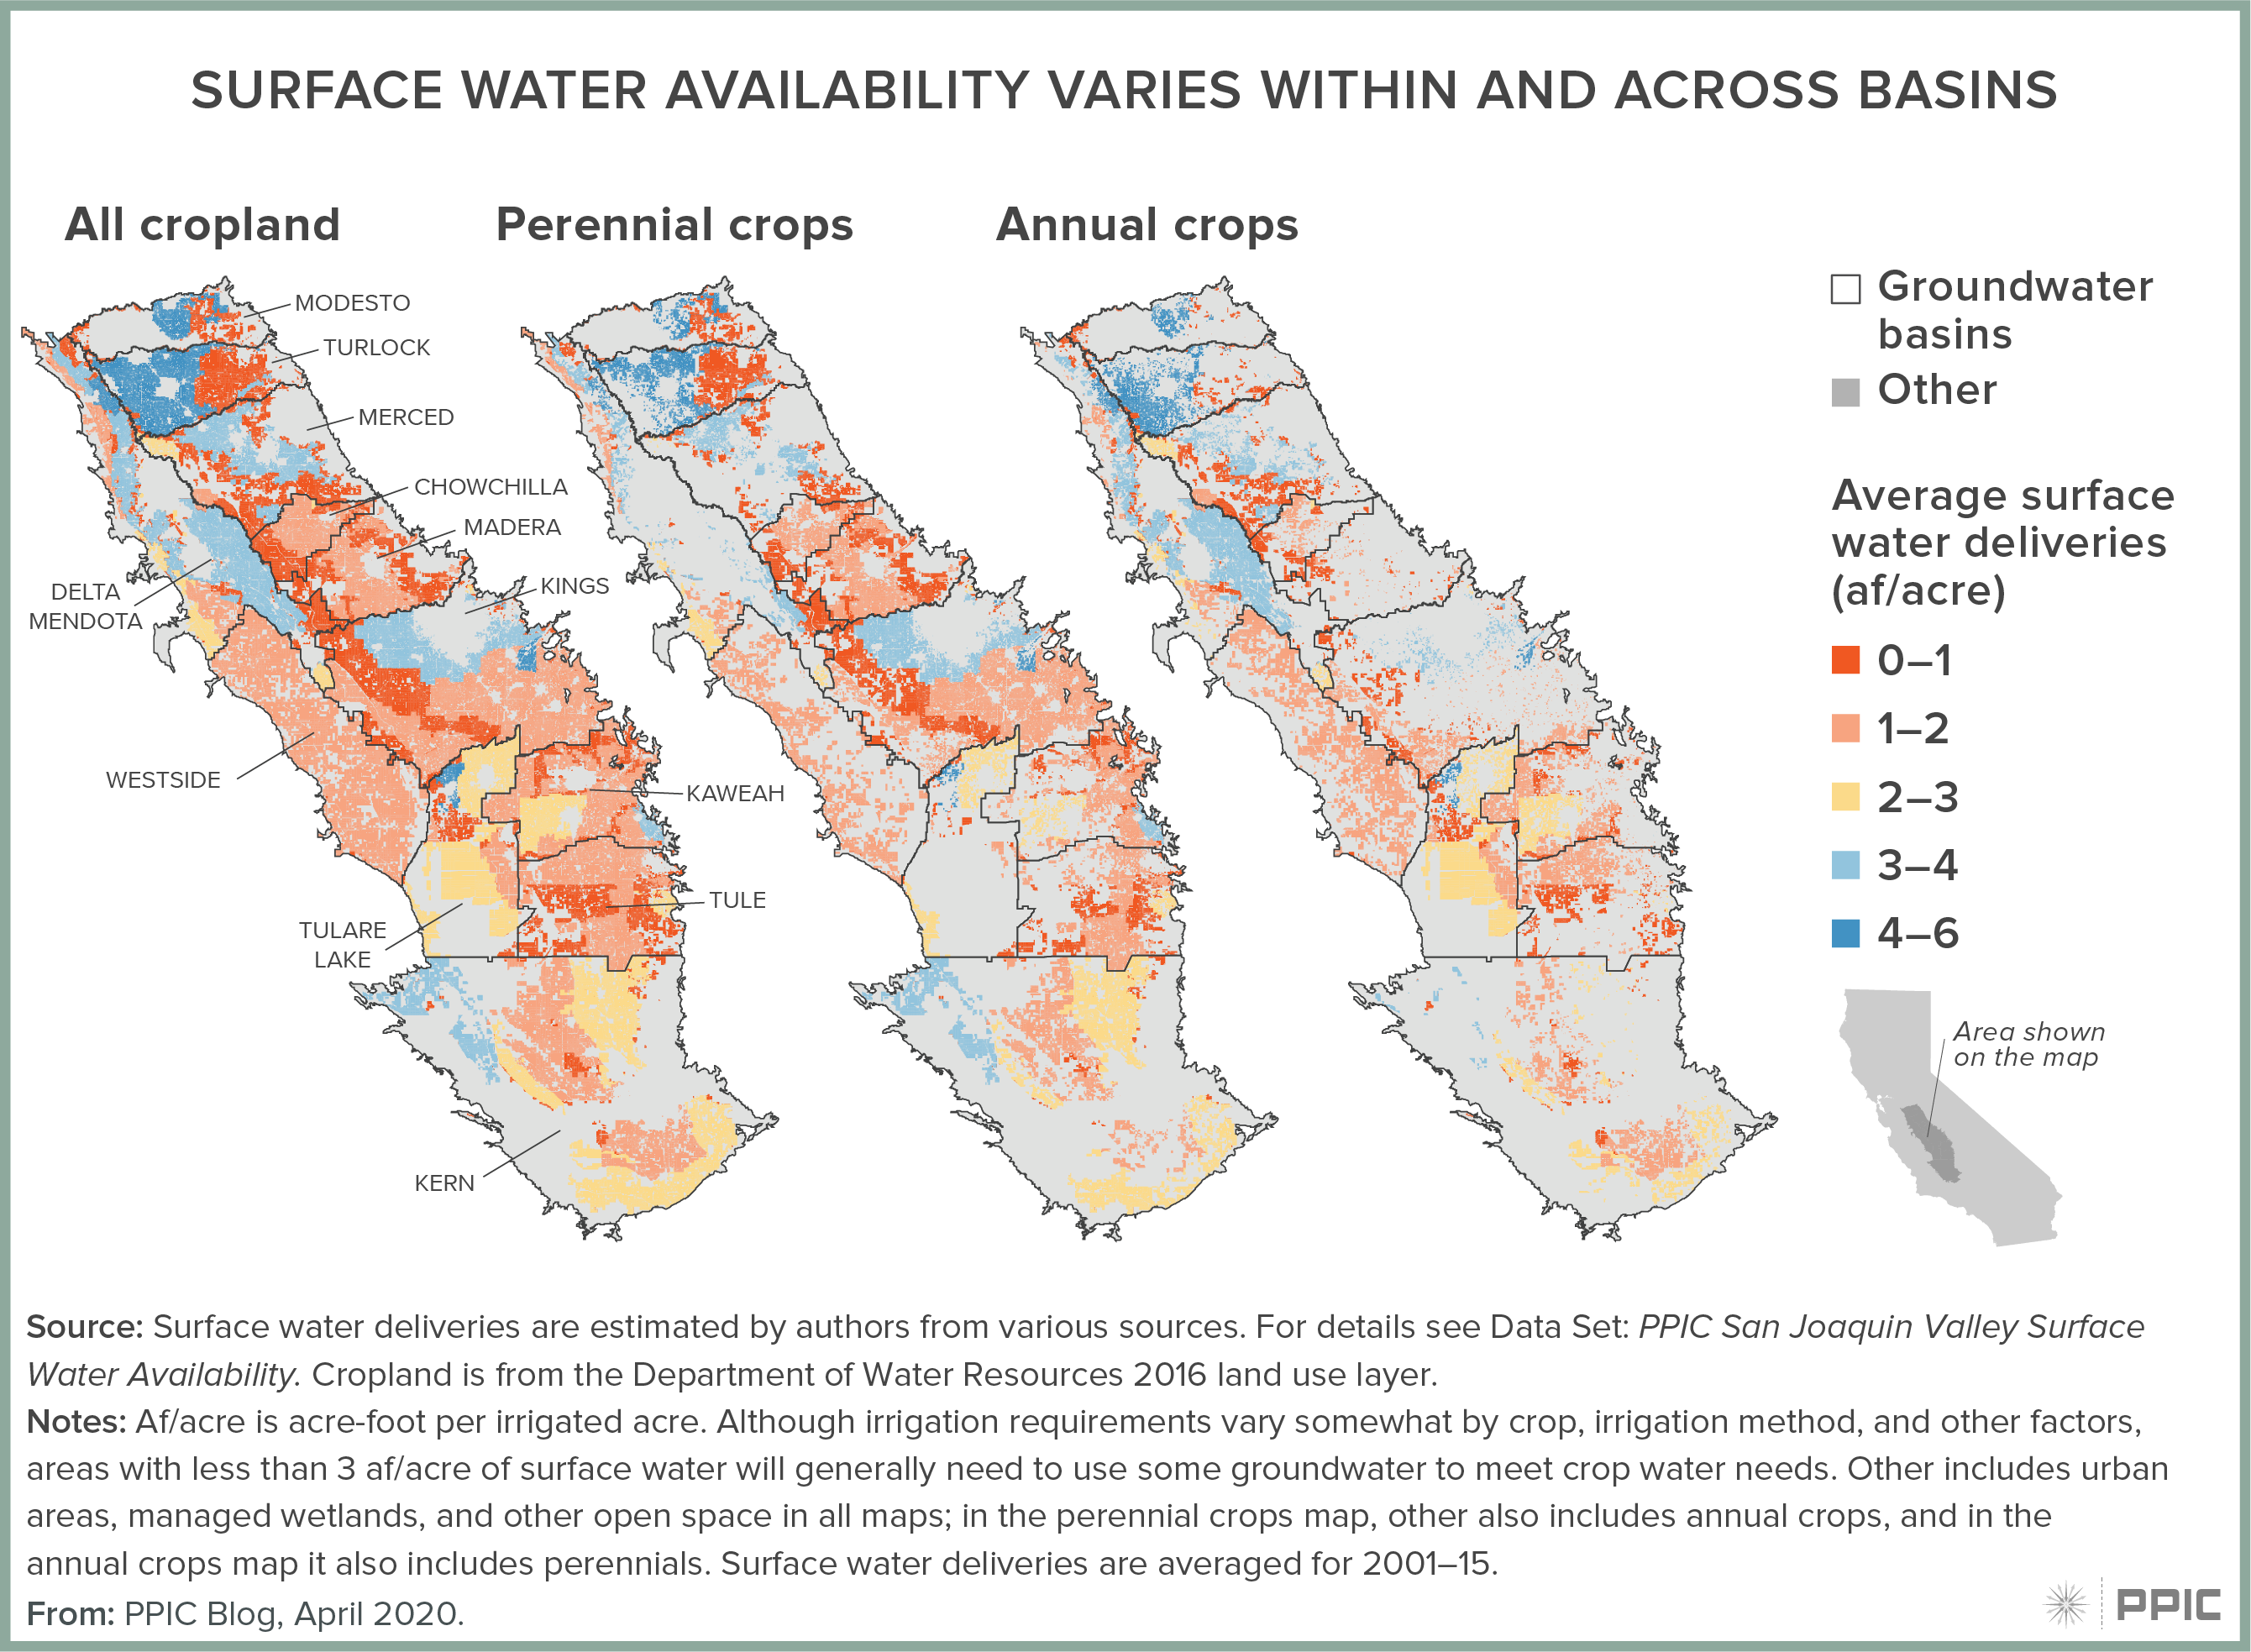 figure - Surface Water Availability Varies Within and Across Basins